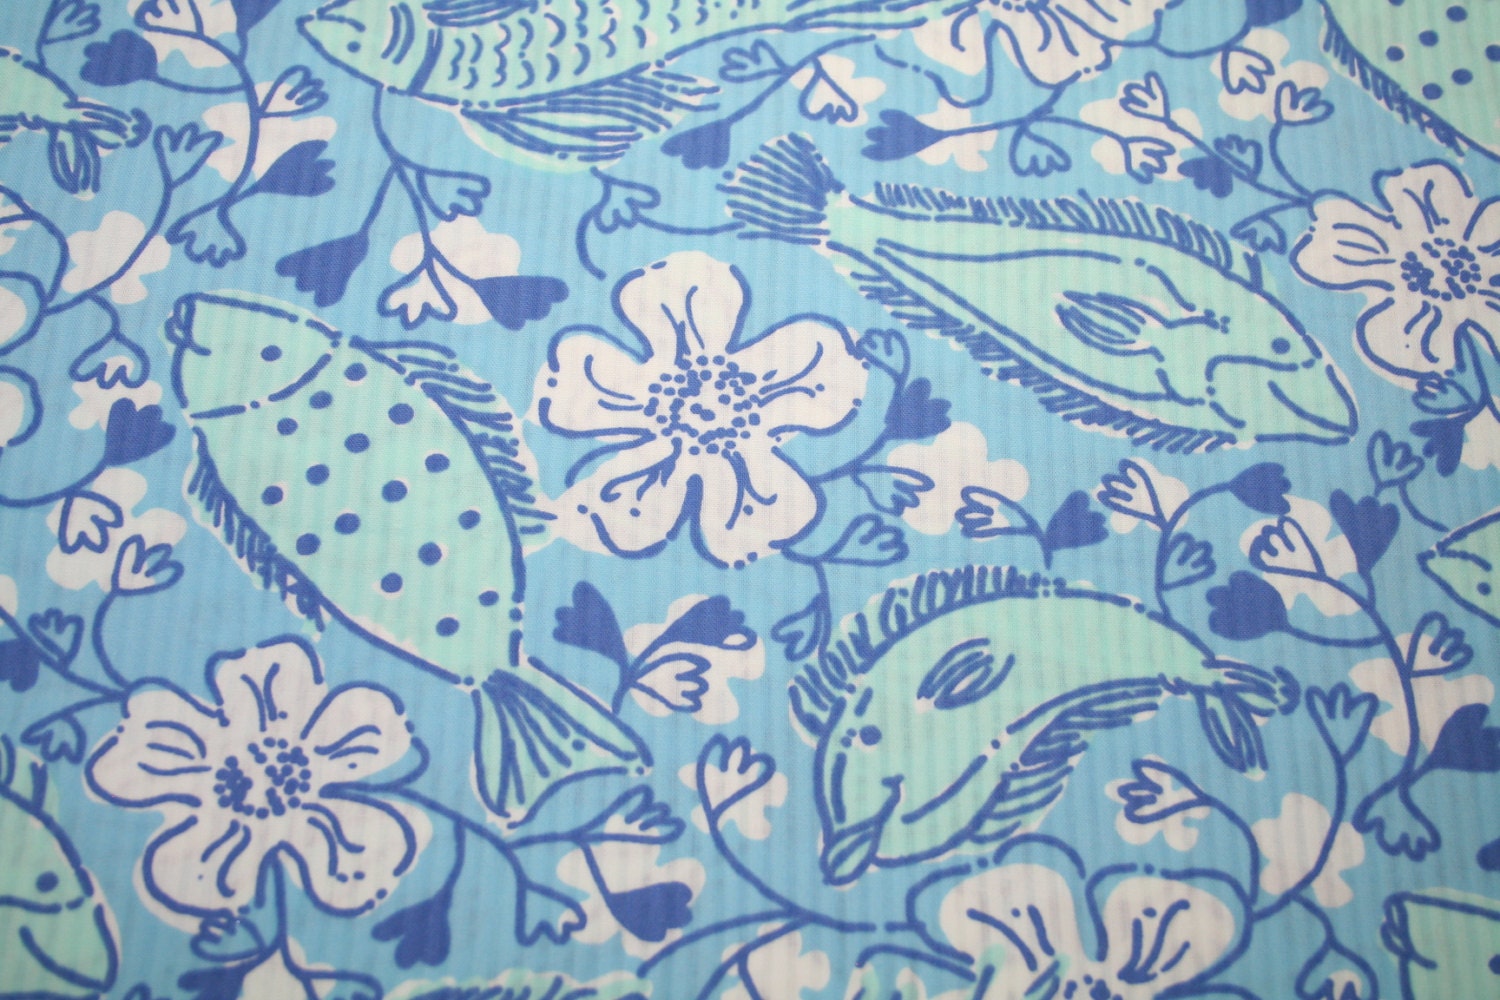 Lilly Pulitzer fabric BLUE FISH 100% cotton